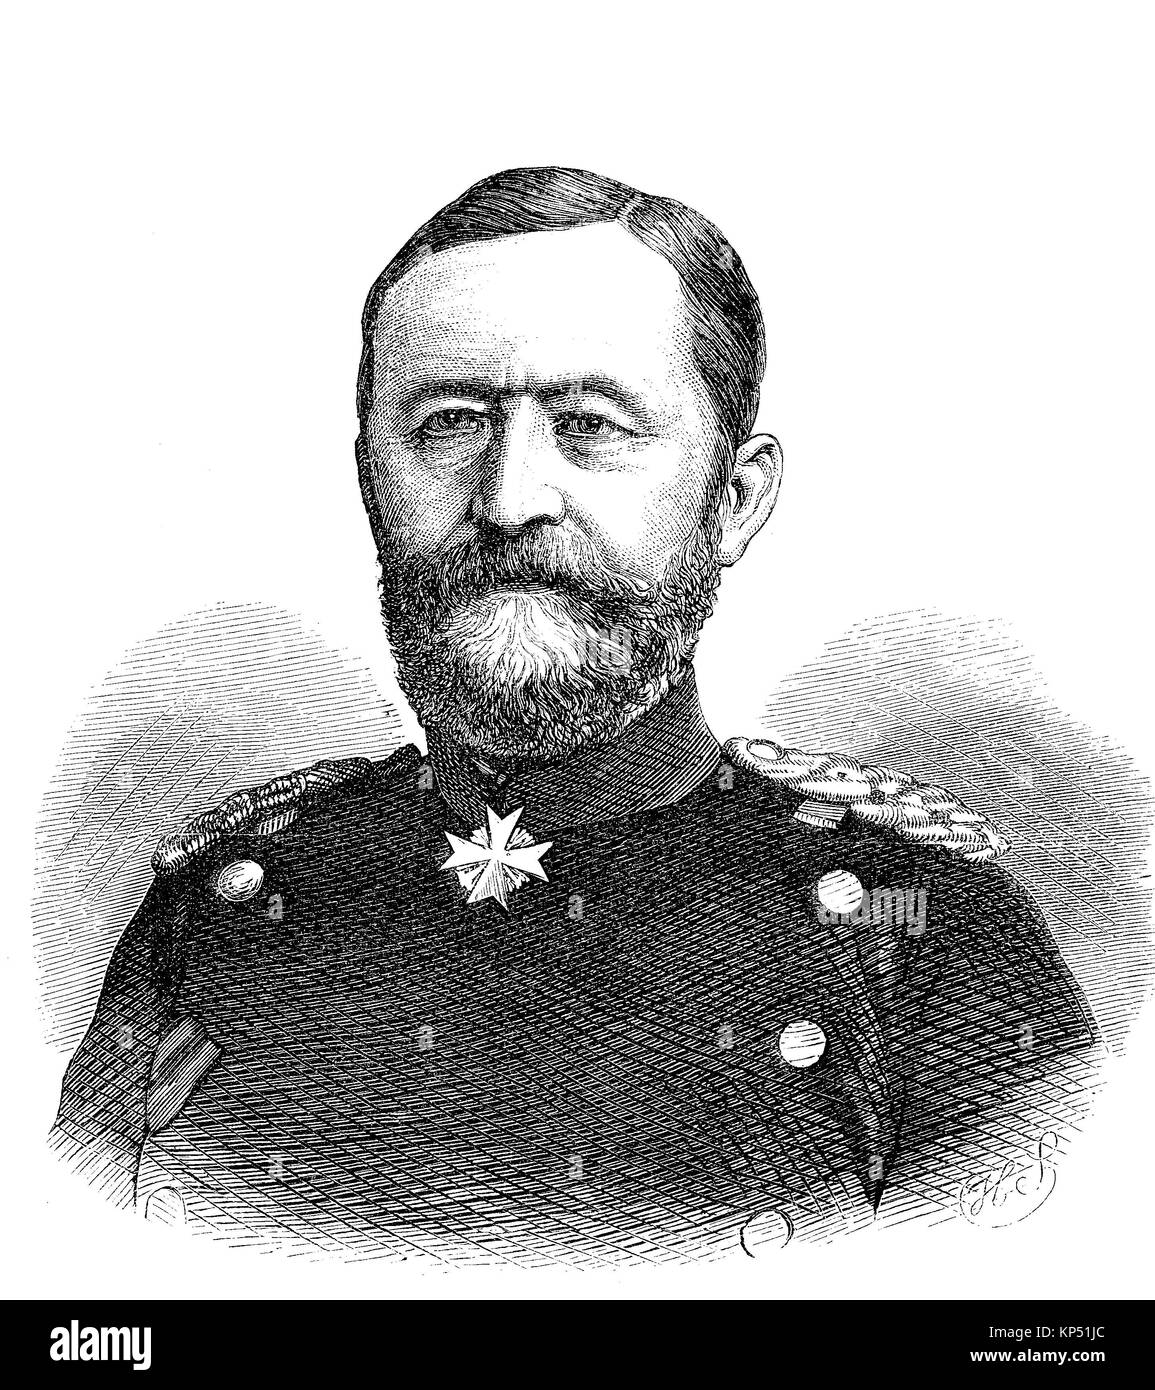 Oskar Ernst Karl von Sperling, January 31, 1814 - May 1, 1872, was a Prussian major general, Germany, German-French campaign of 1870, time of the Franco-Prussian War or Franco-German War, Deutsch-Franzoesischer Krieg, 1870 - 1871, digital improved reproduction of an original woodcut from 1871 Stock Photo